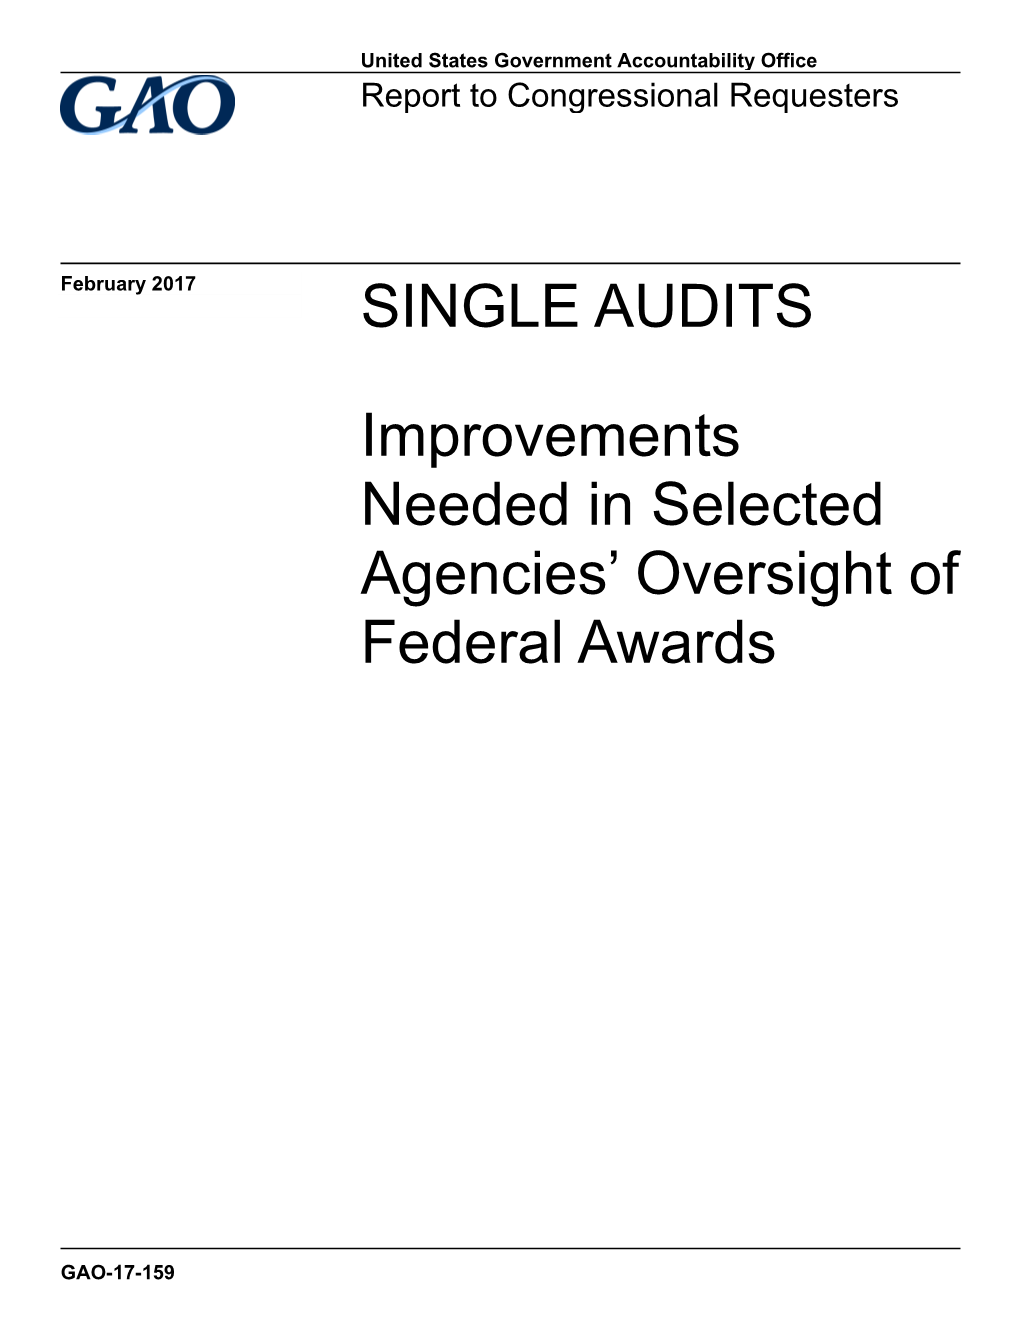 GAO-17-159, SINGLE AUDITS: Improvements Needed in Selected Agencies' Oversight of Federal Awards